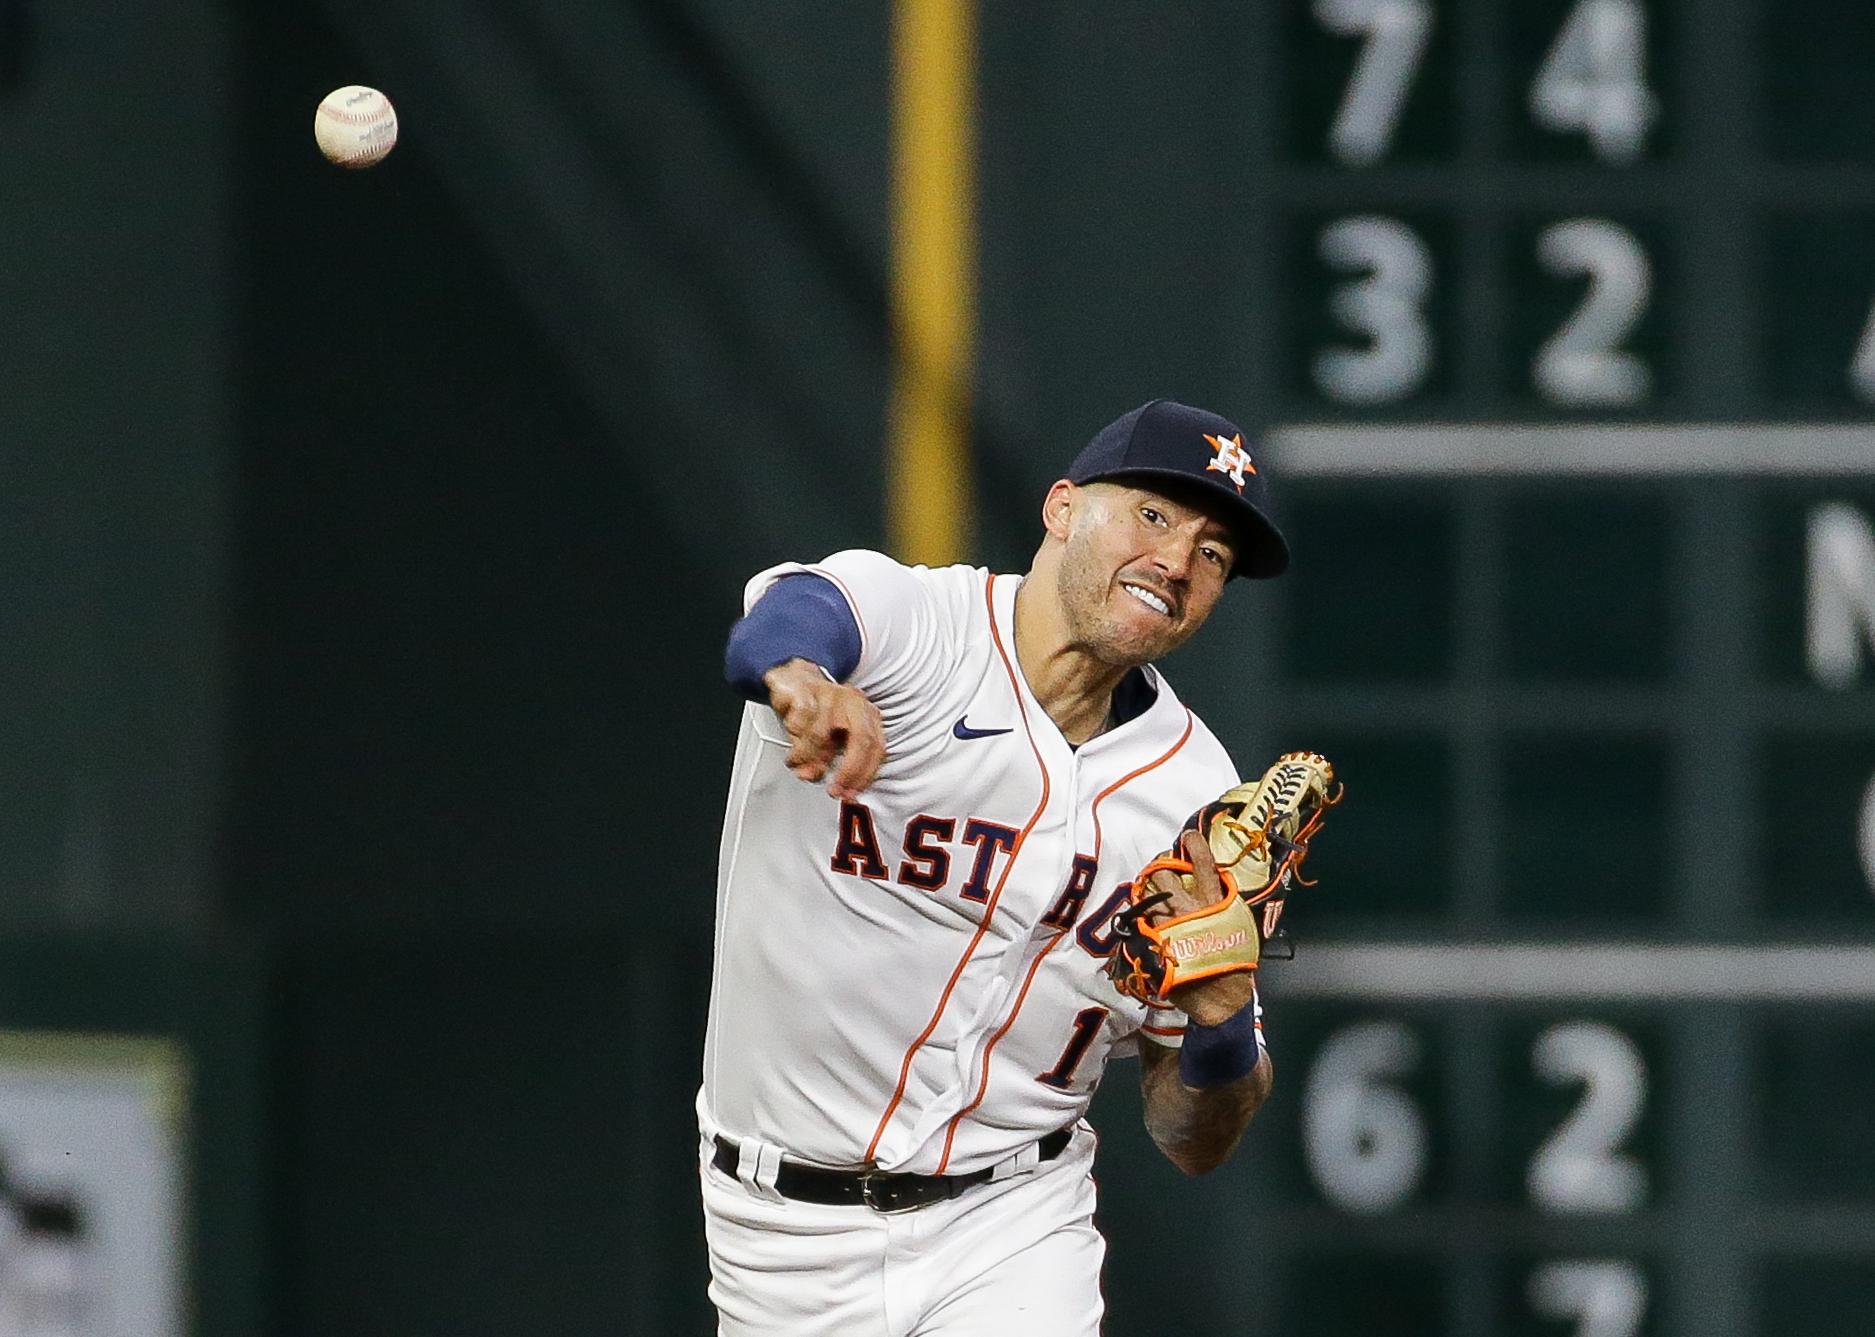 Cannonball coming! The arm that makes Carlos Correa a special shortstop